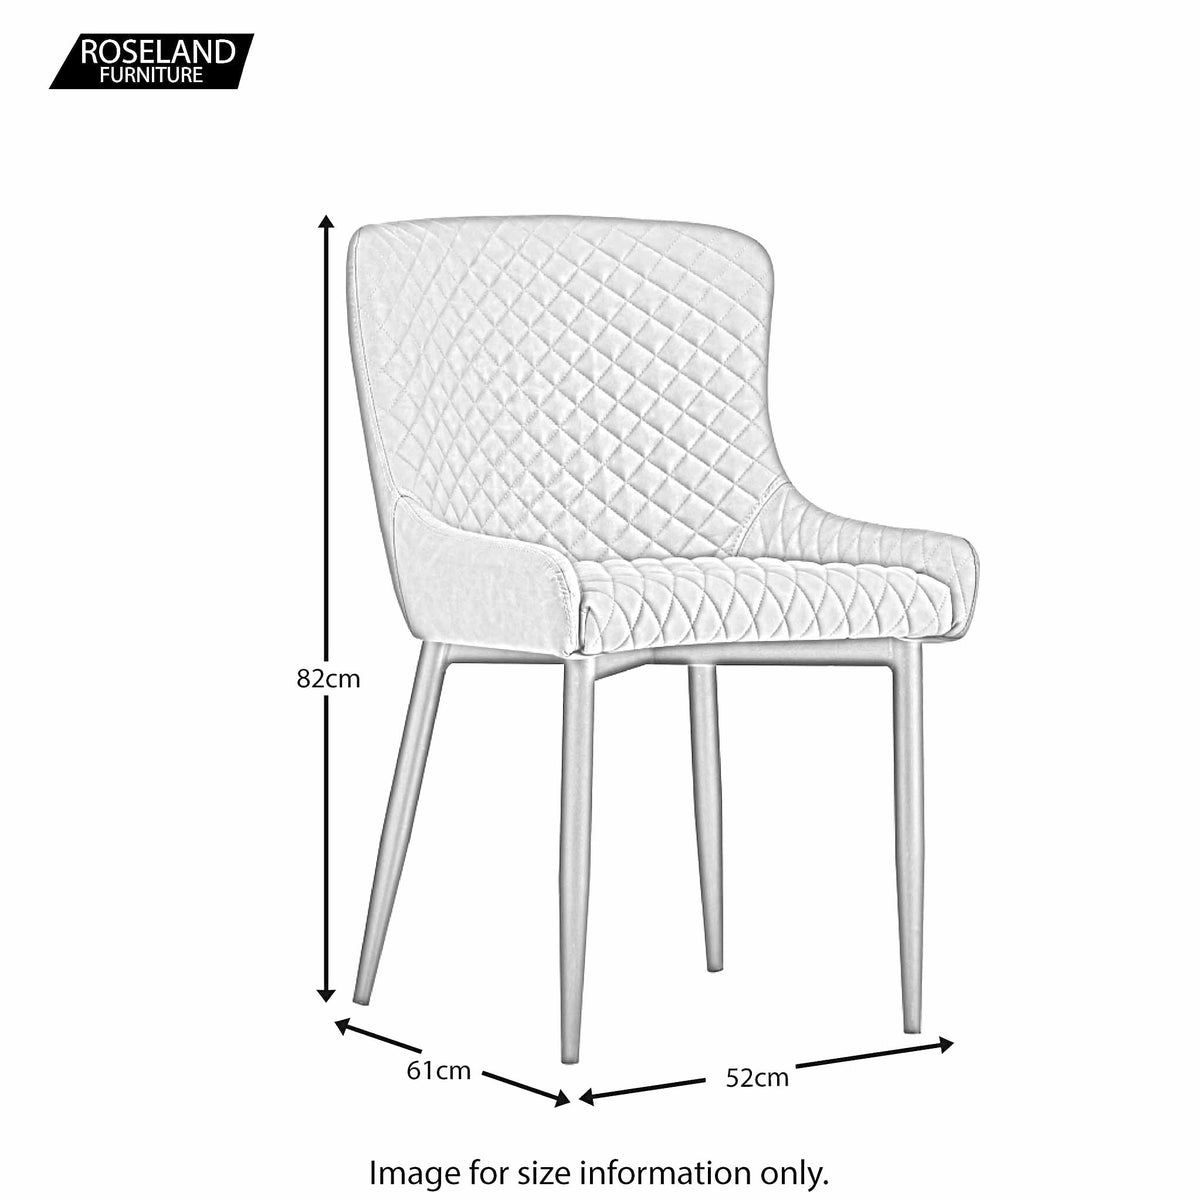 Brooklyn Dining Chair - Size Guide